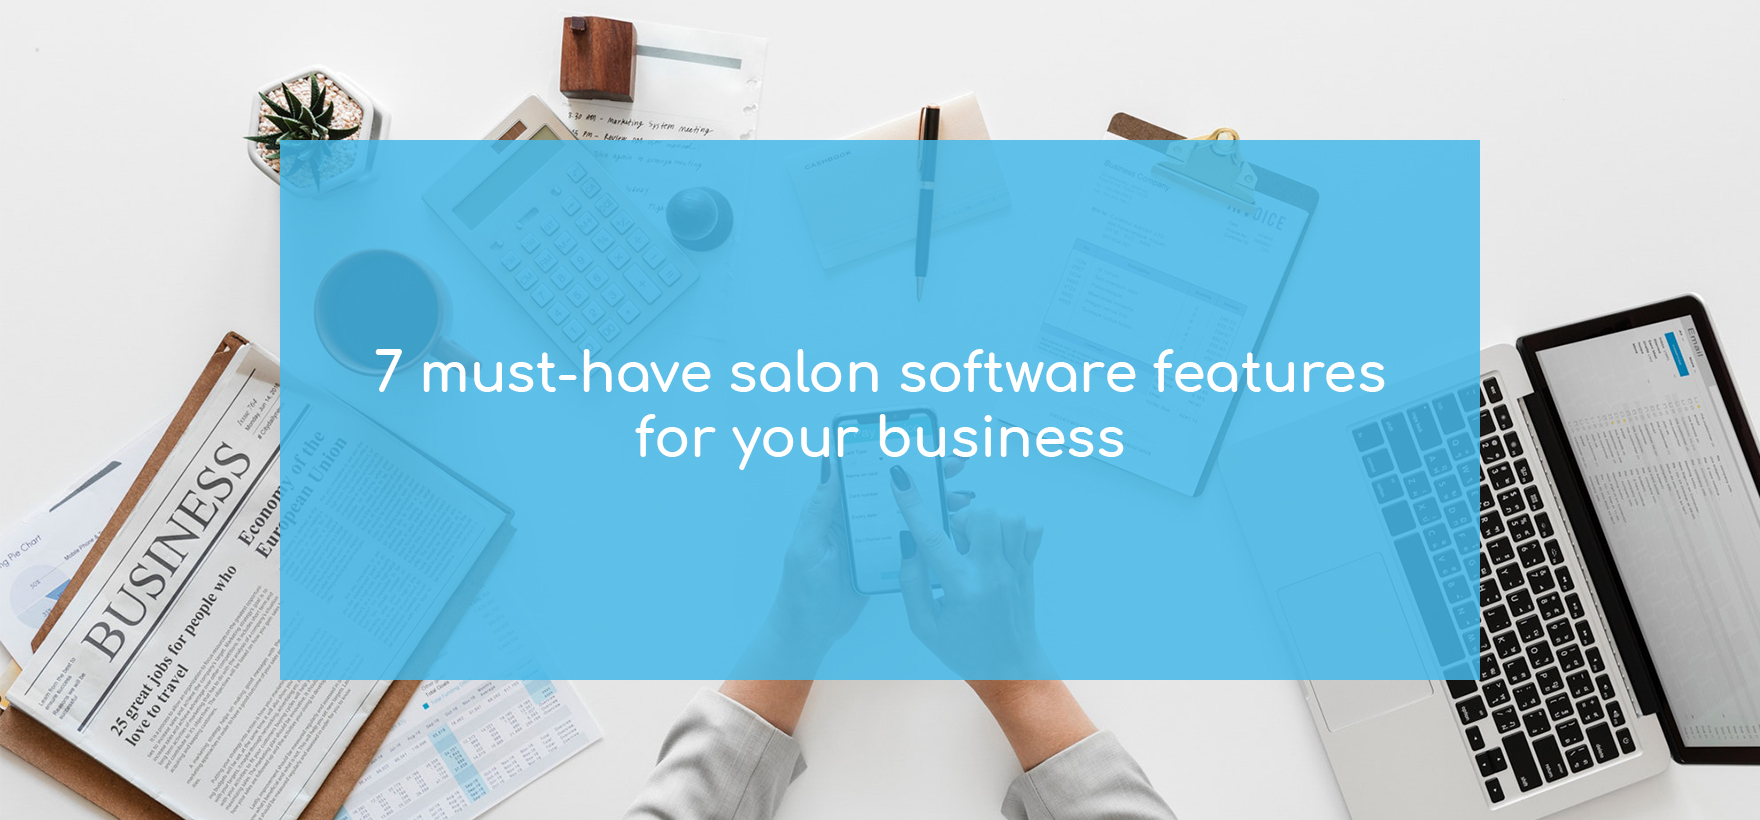 7 must-have salon management software features for your business